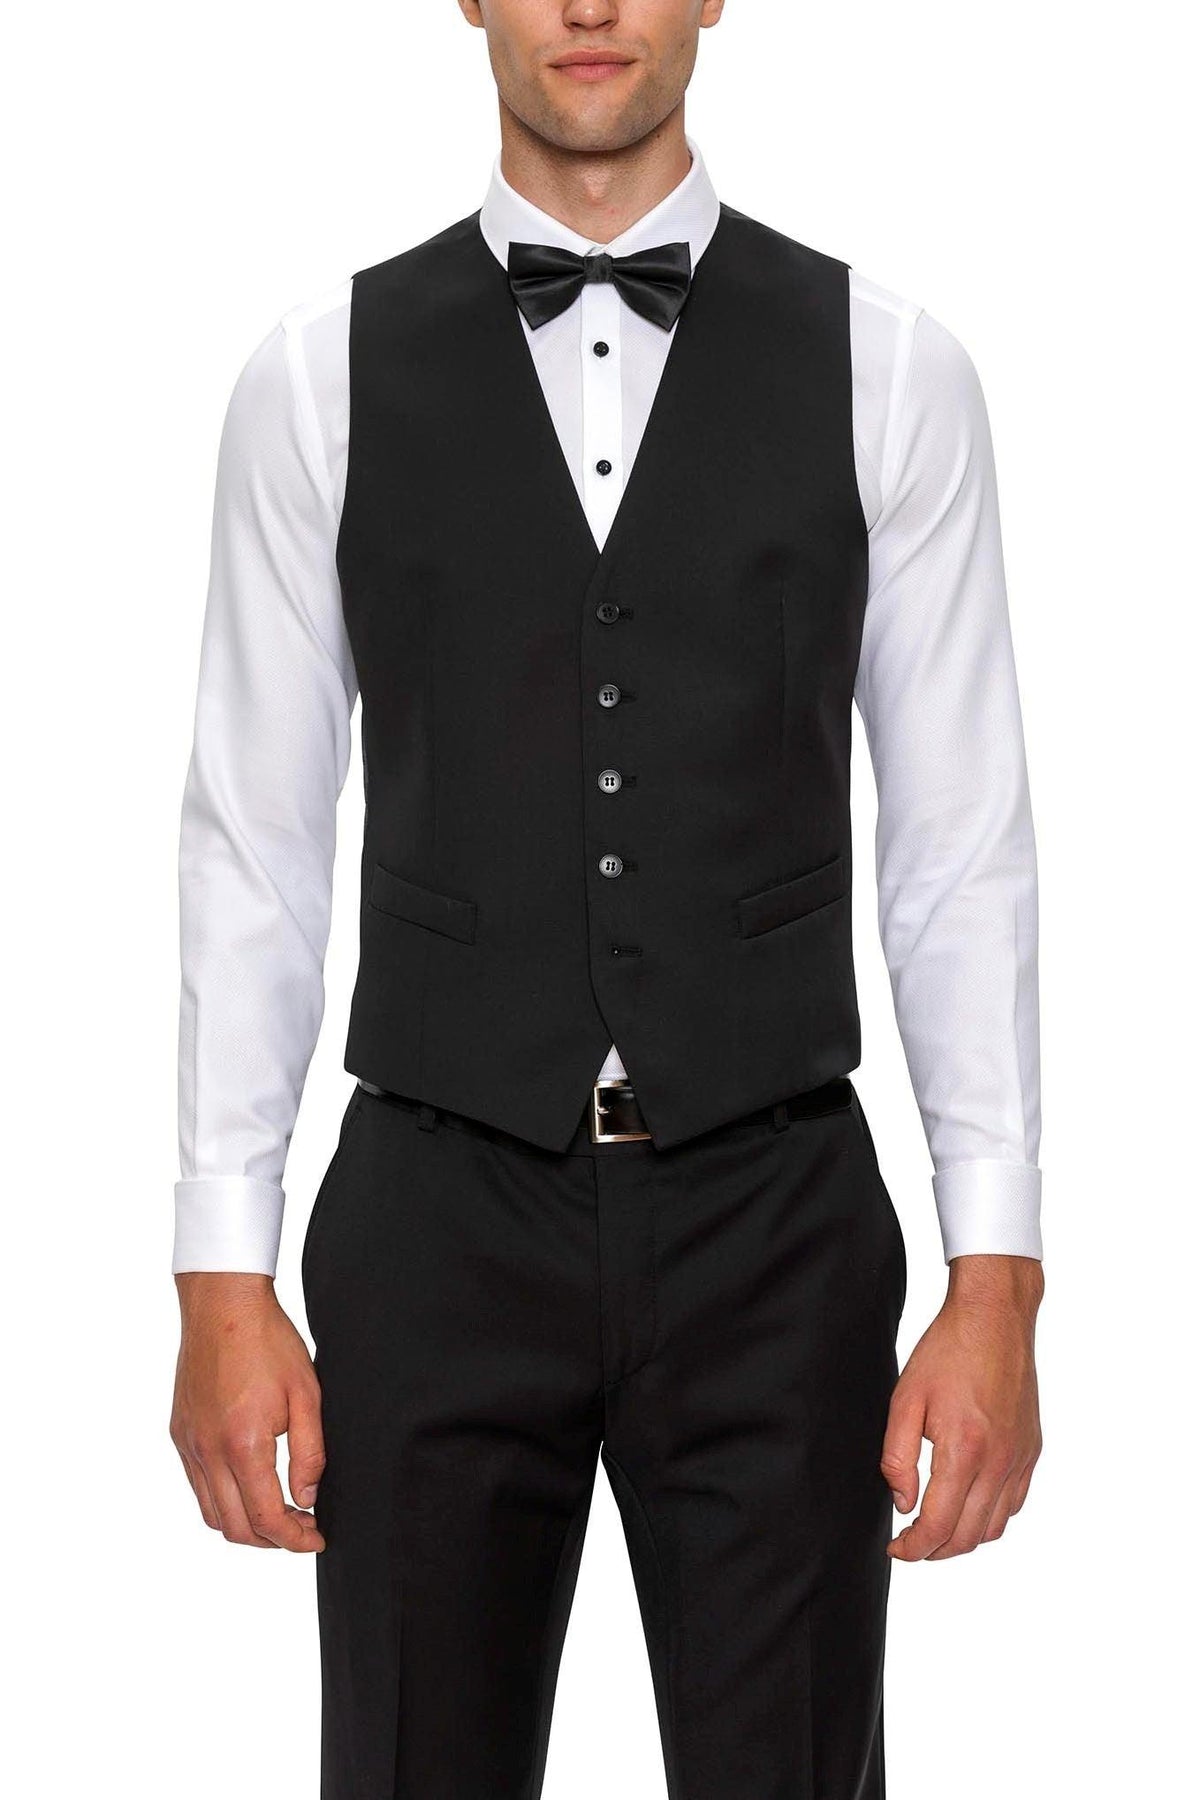 Mighty F34087 BlackMighty F34087 Black - Gibson Vest  https://harrysformenswear.com.au/products/mighty-f34087-black-gibson-vest  Gibson Dinner Jacket Crafted in 100% pure wool, the slim-fit Spectre tuxedo jacket is timeless and stylish. The refined satin shawl lapel and jet pockets offset the entire look. Complete the look with either Rebellion or Blast trouser and Mighty vest in F34087. 50mm shawl lapel 2 button front Satin jet pockets Side ven…